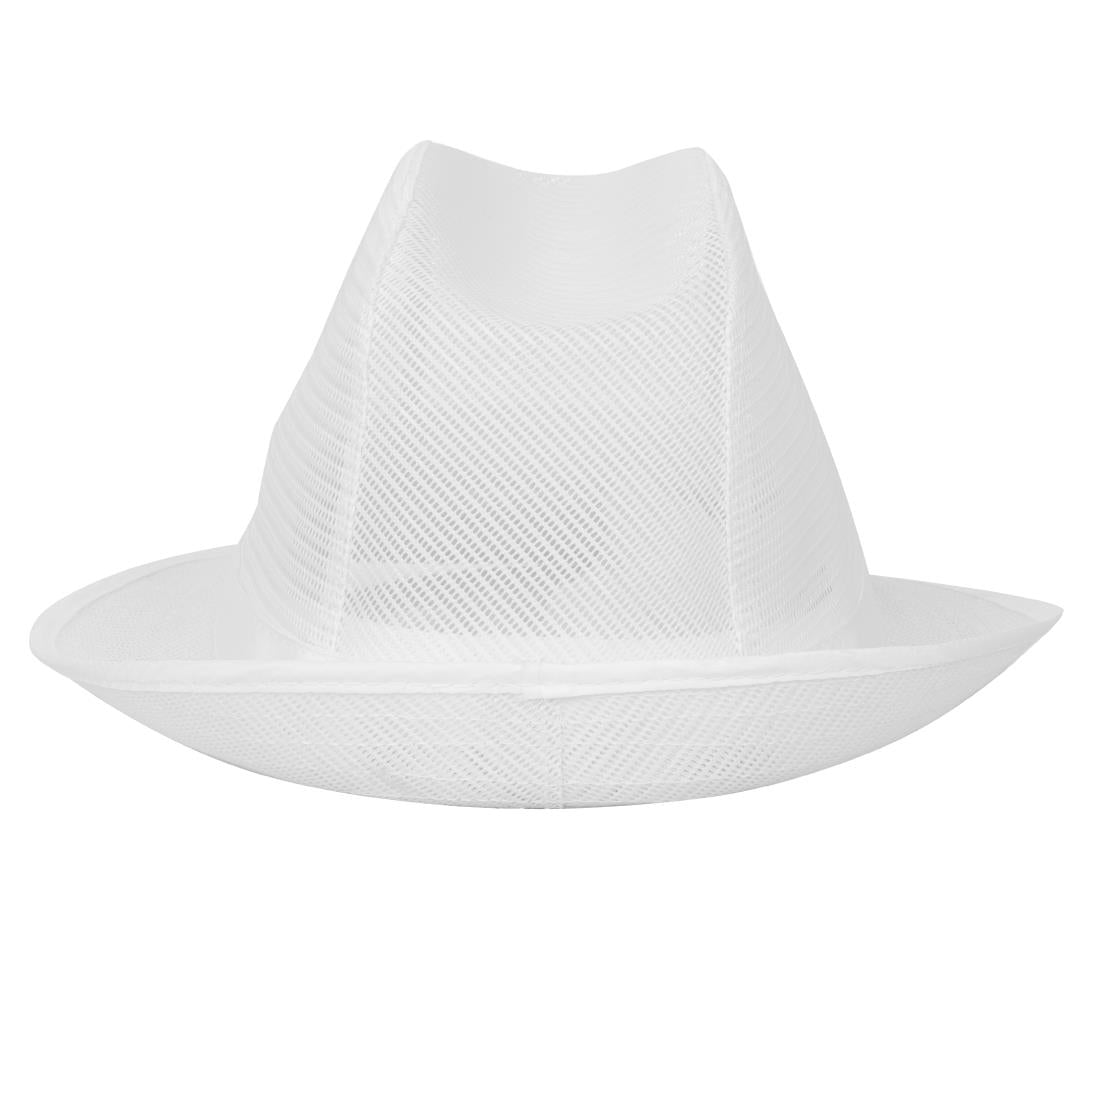 A653-S Trilby Hat with Net Snood White S JD Catering Equipment Solutions Ltd